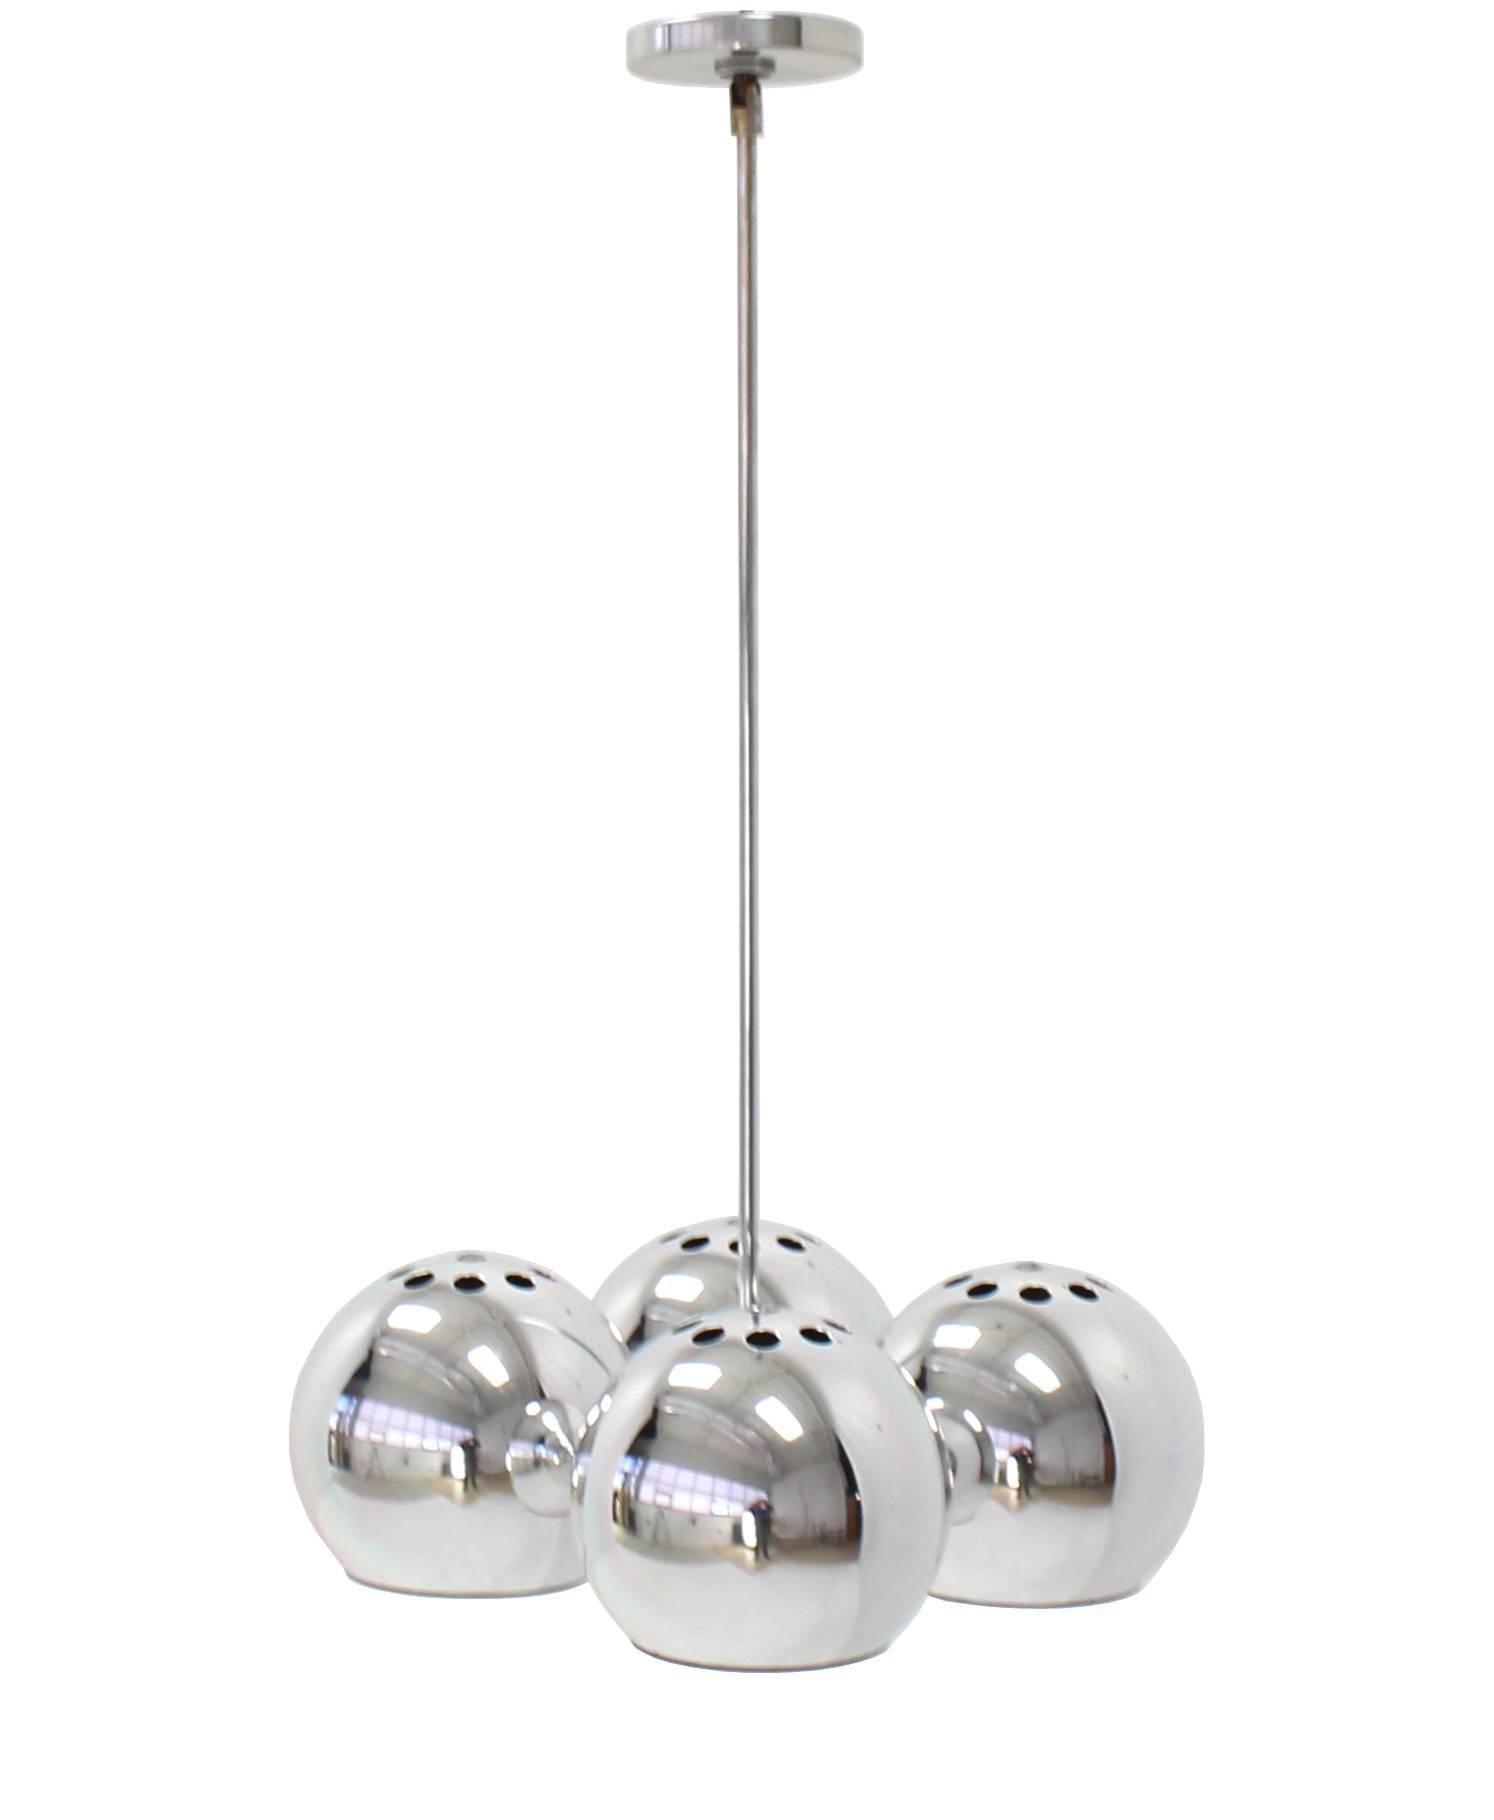 Very nice cluster of four chrome globes Mid-Century Modern light fixture.